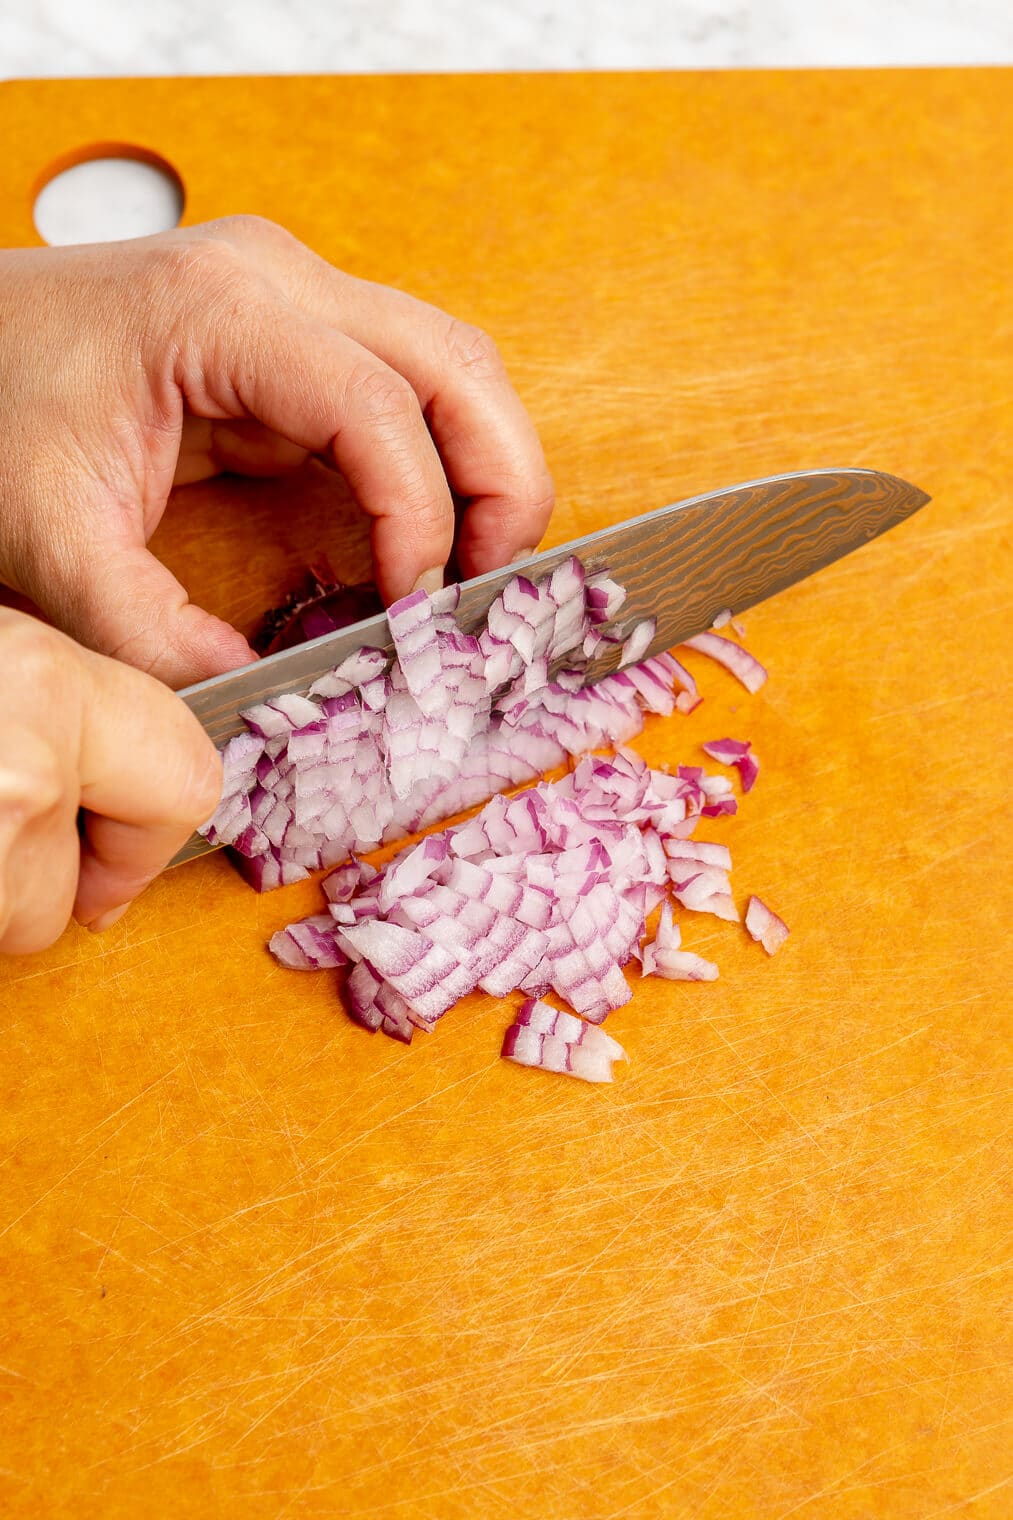 A person finely chopping a purple onion with a chef's knife on an orange cutting board.